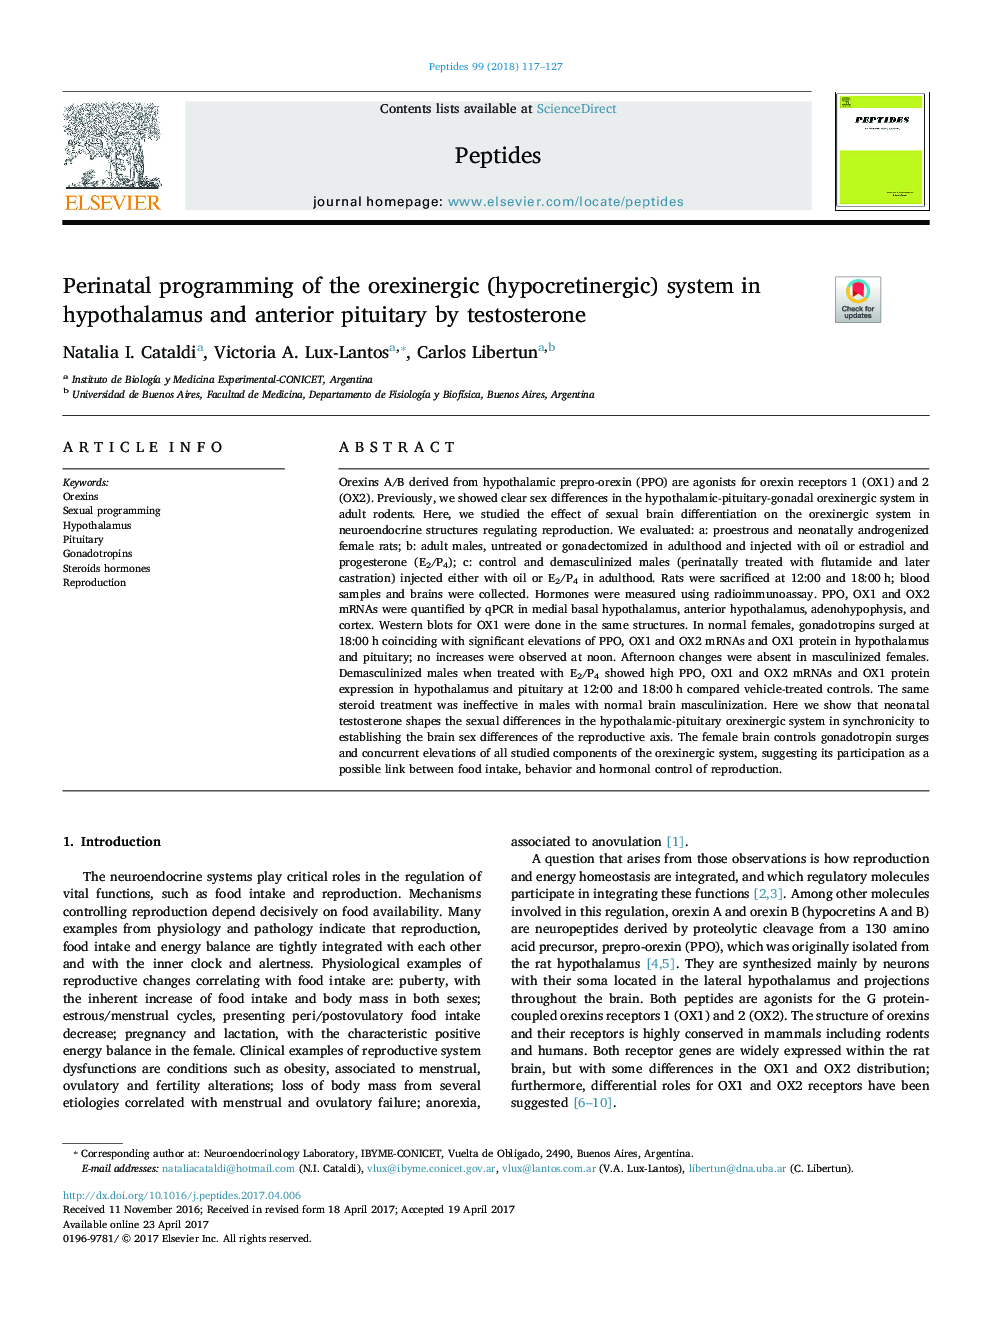 Perinatal programming of the orexinergic (hypocretinergic) system in hypothalamus and anterior pituitary by testosterone